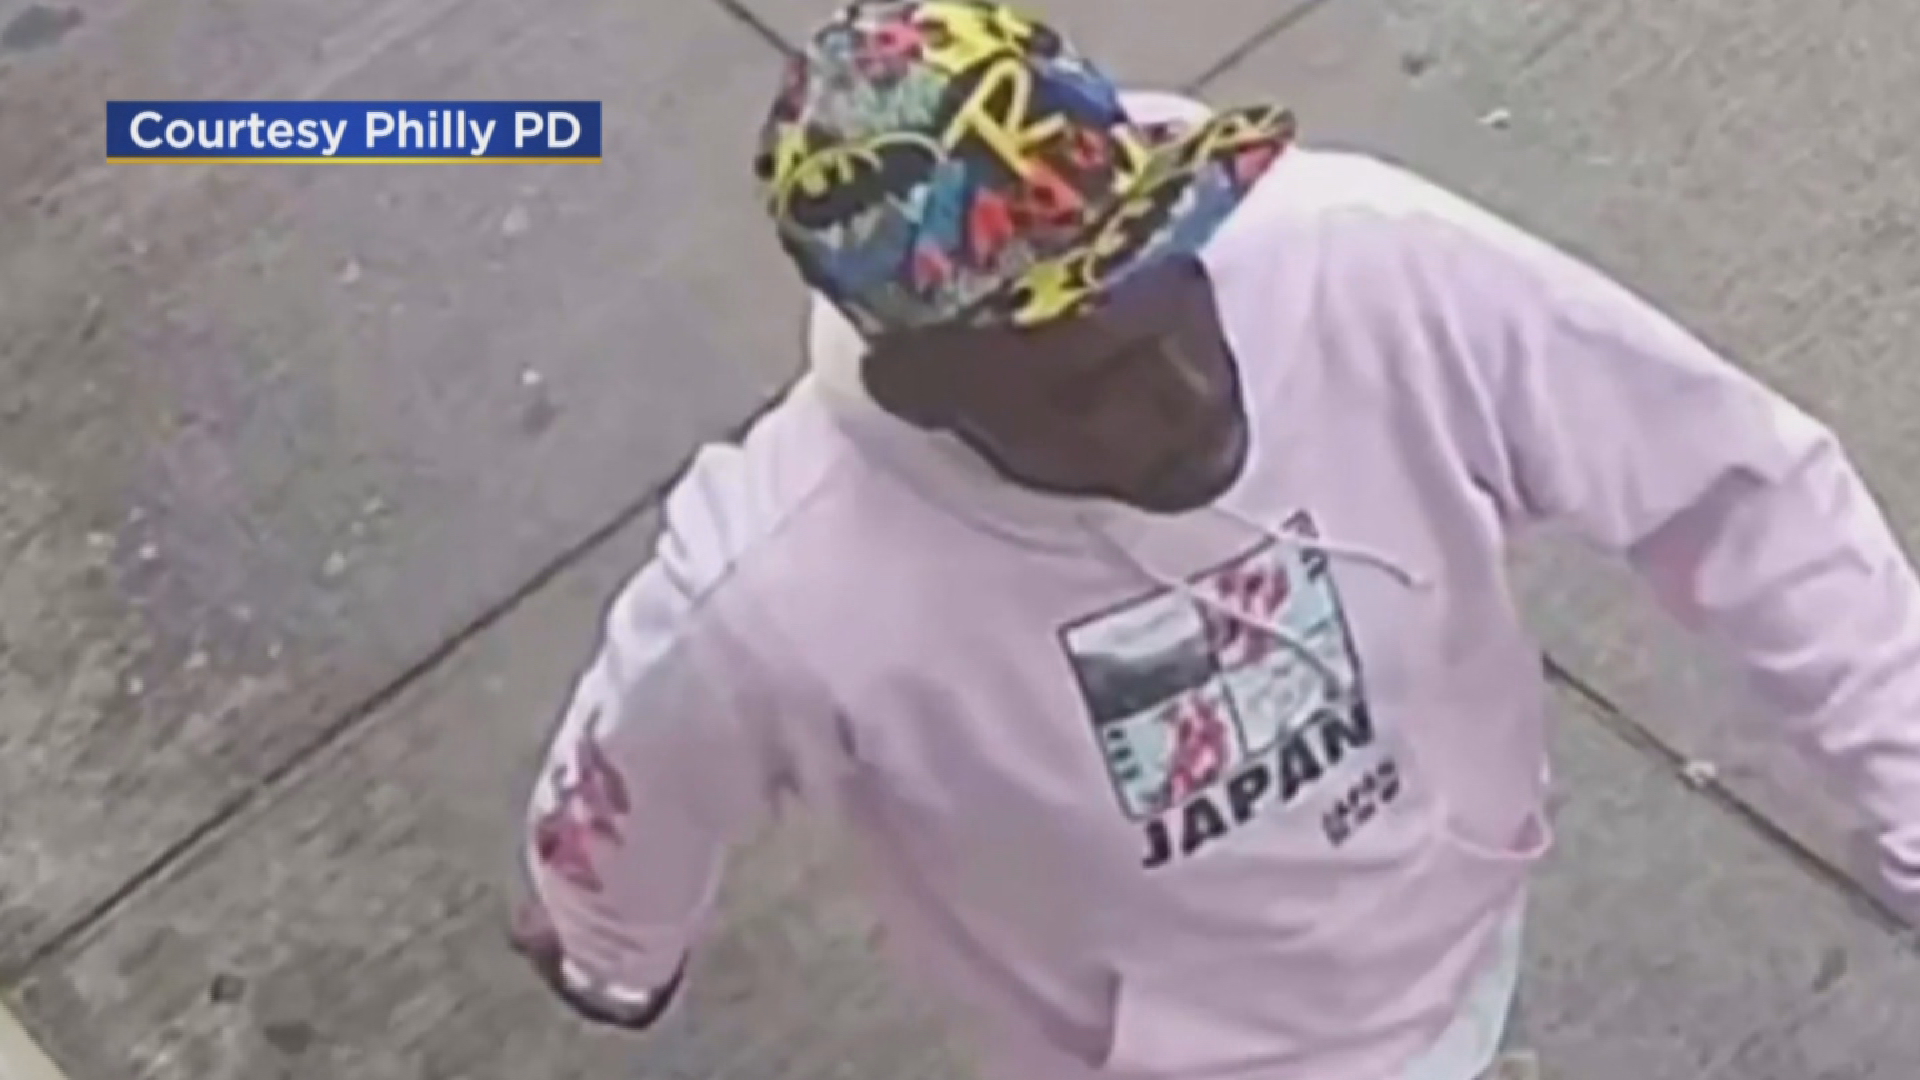 VIDEO: Philadelphia Police Asking For Public's Help To Identify Man Accused Of Murder